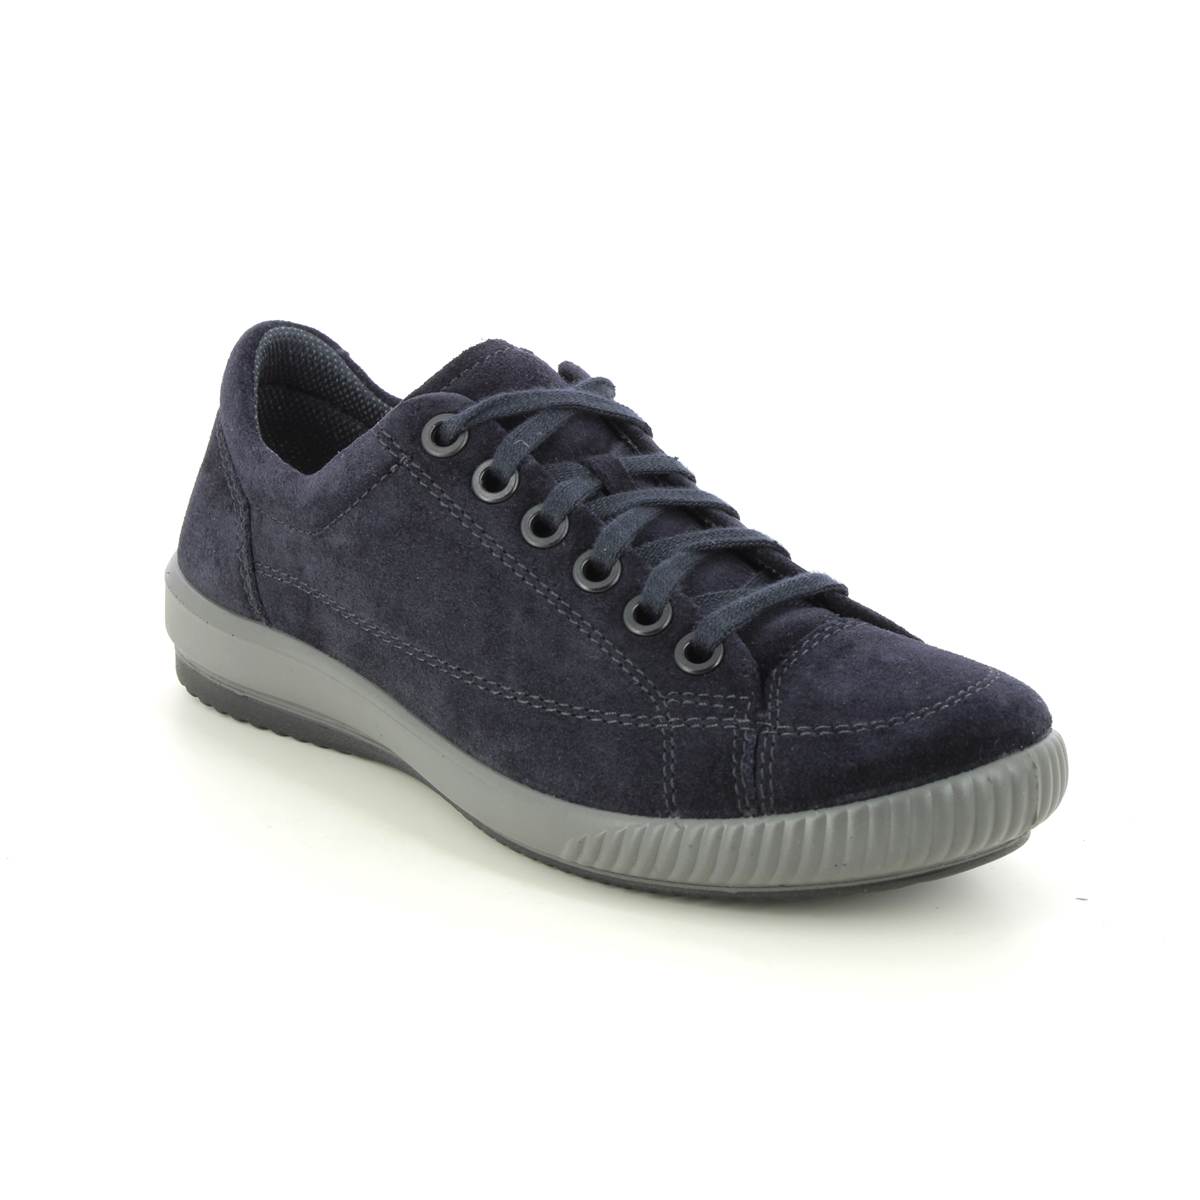 Legero Tanaro 5 Stitch Navy Suede Womens Lacing Shoes 2000161-8000 In Size 6 In Plain Navy Suede